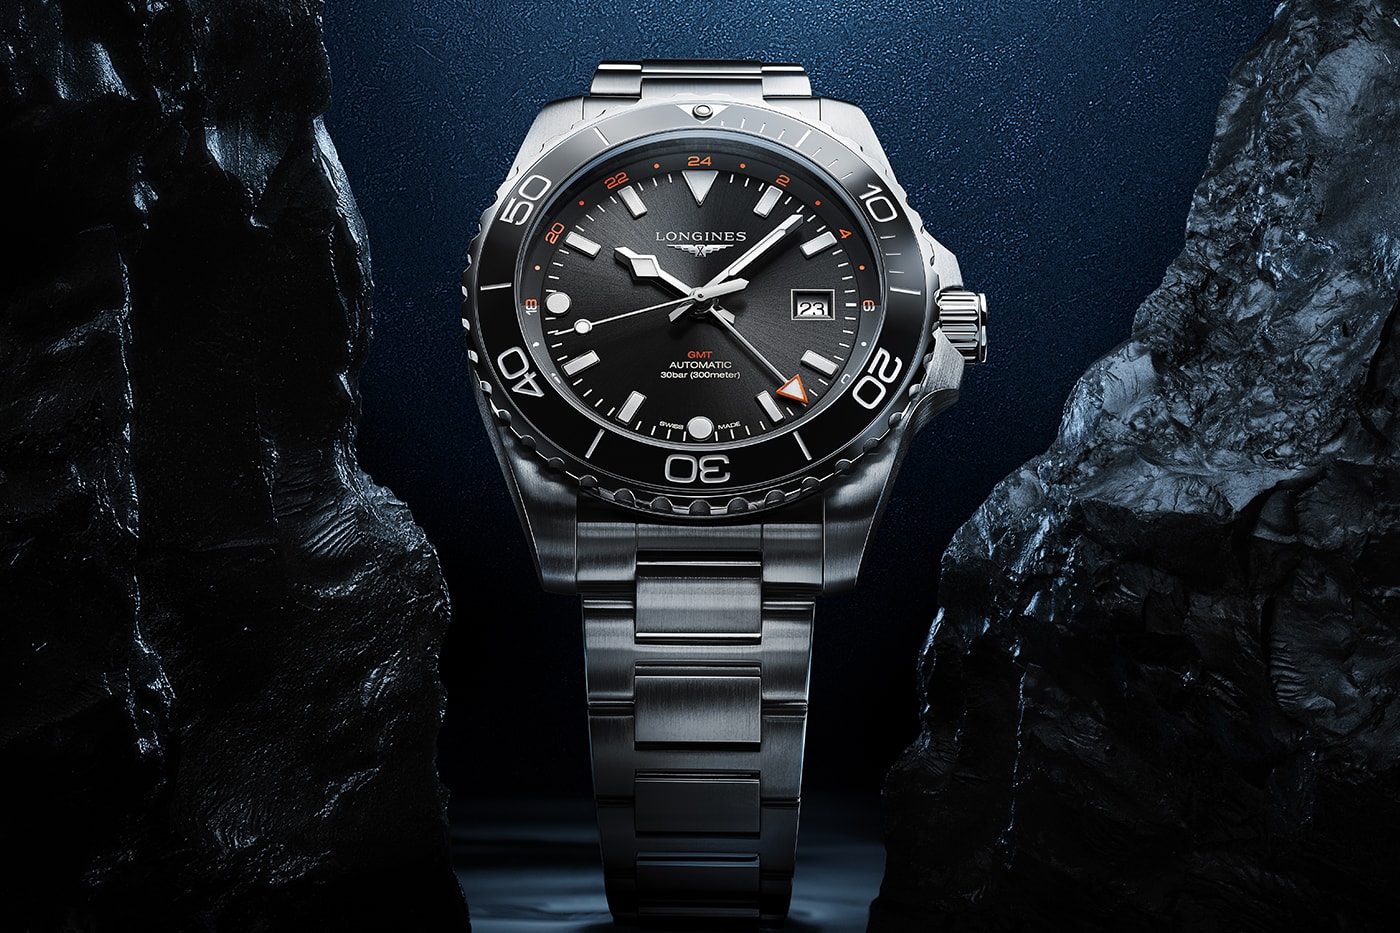 Longines Hydroconquest GMT New 43mm Case Size Info